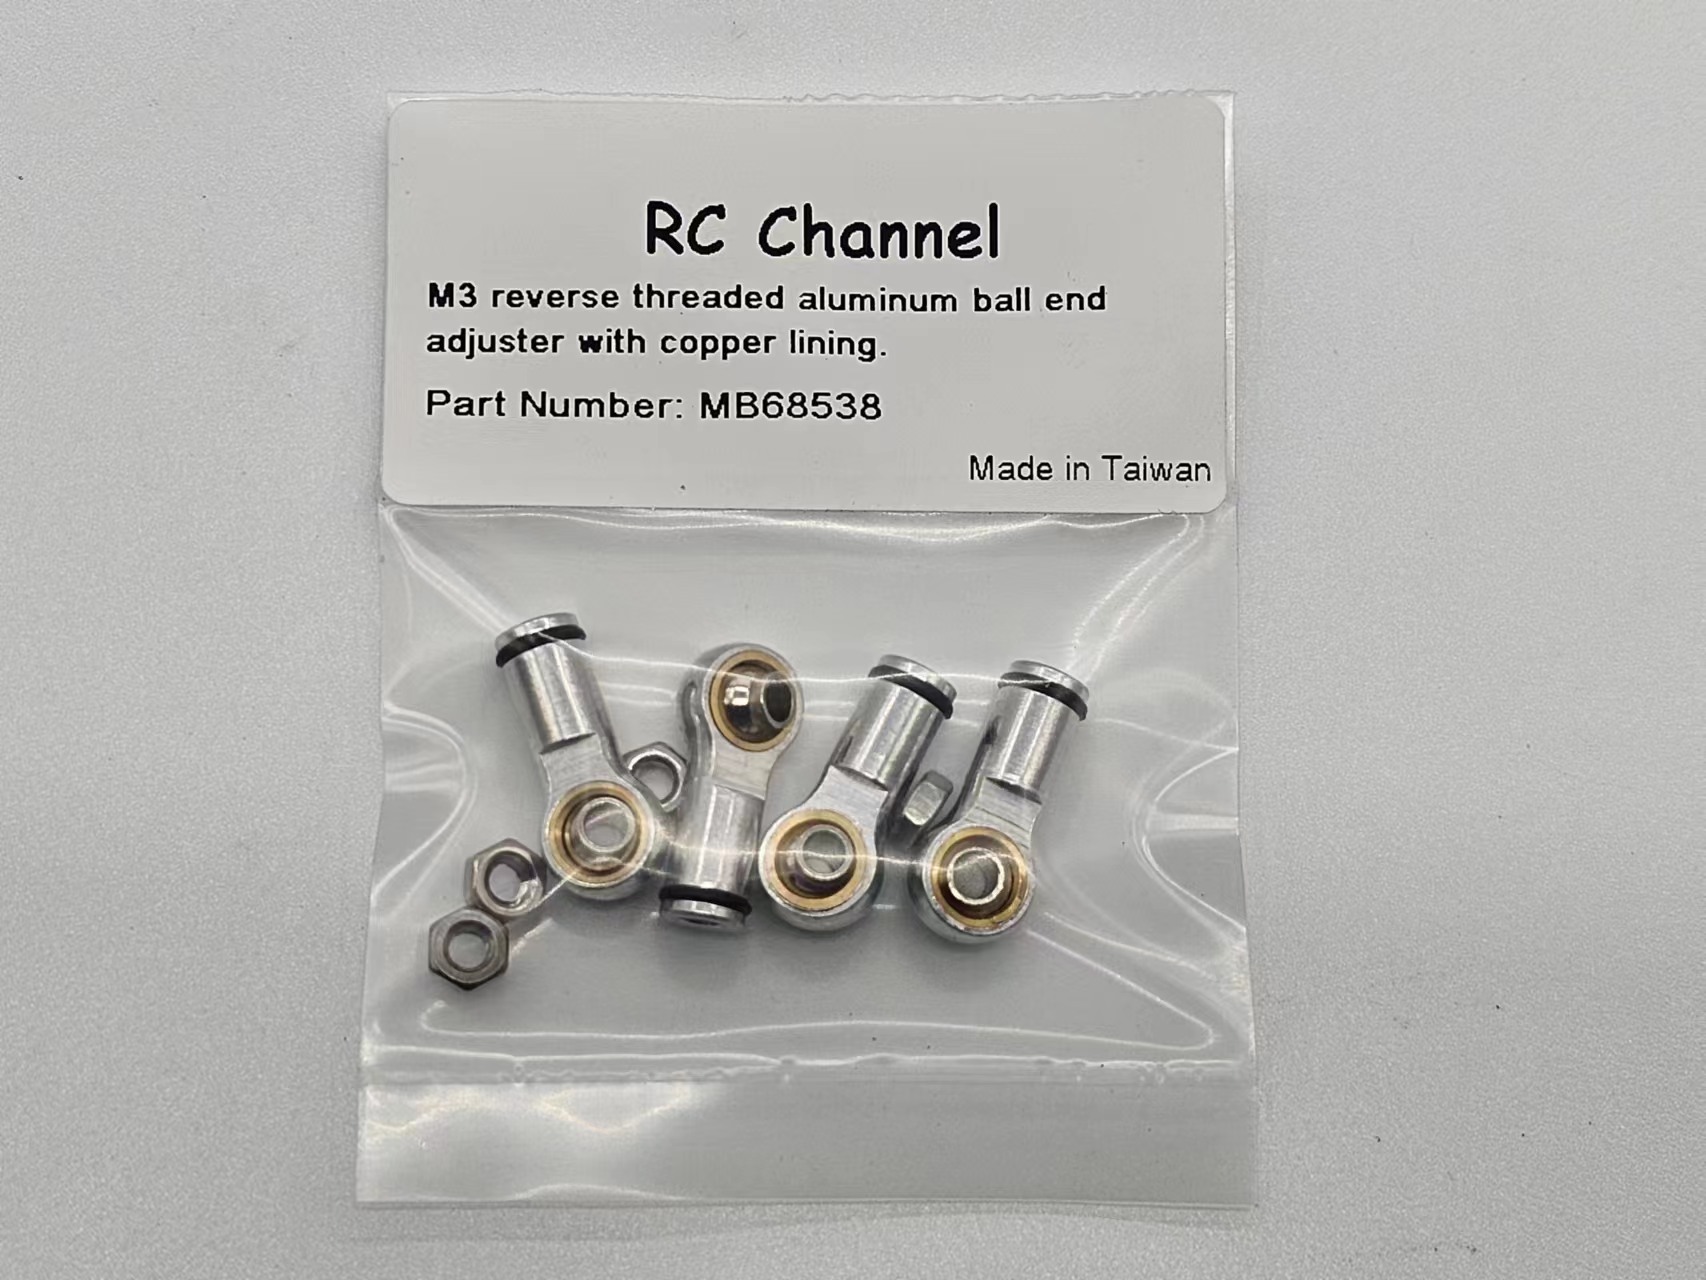 M3 reverse threaded aluminum ball end adjuster with copper lining